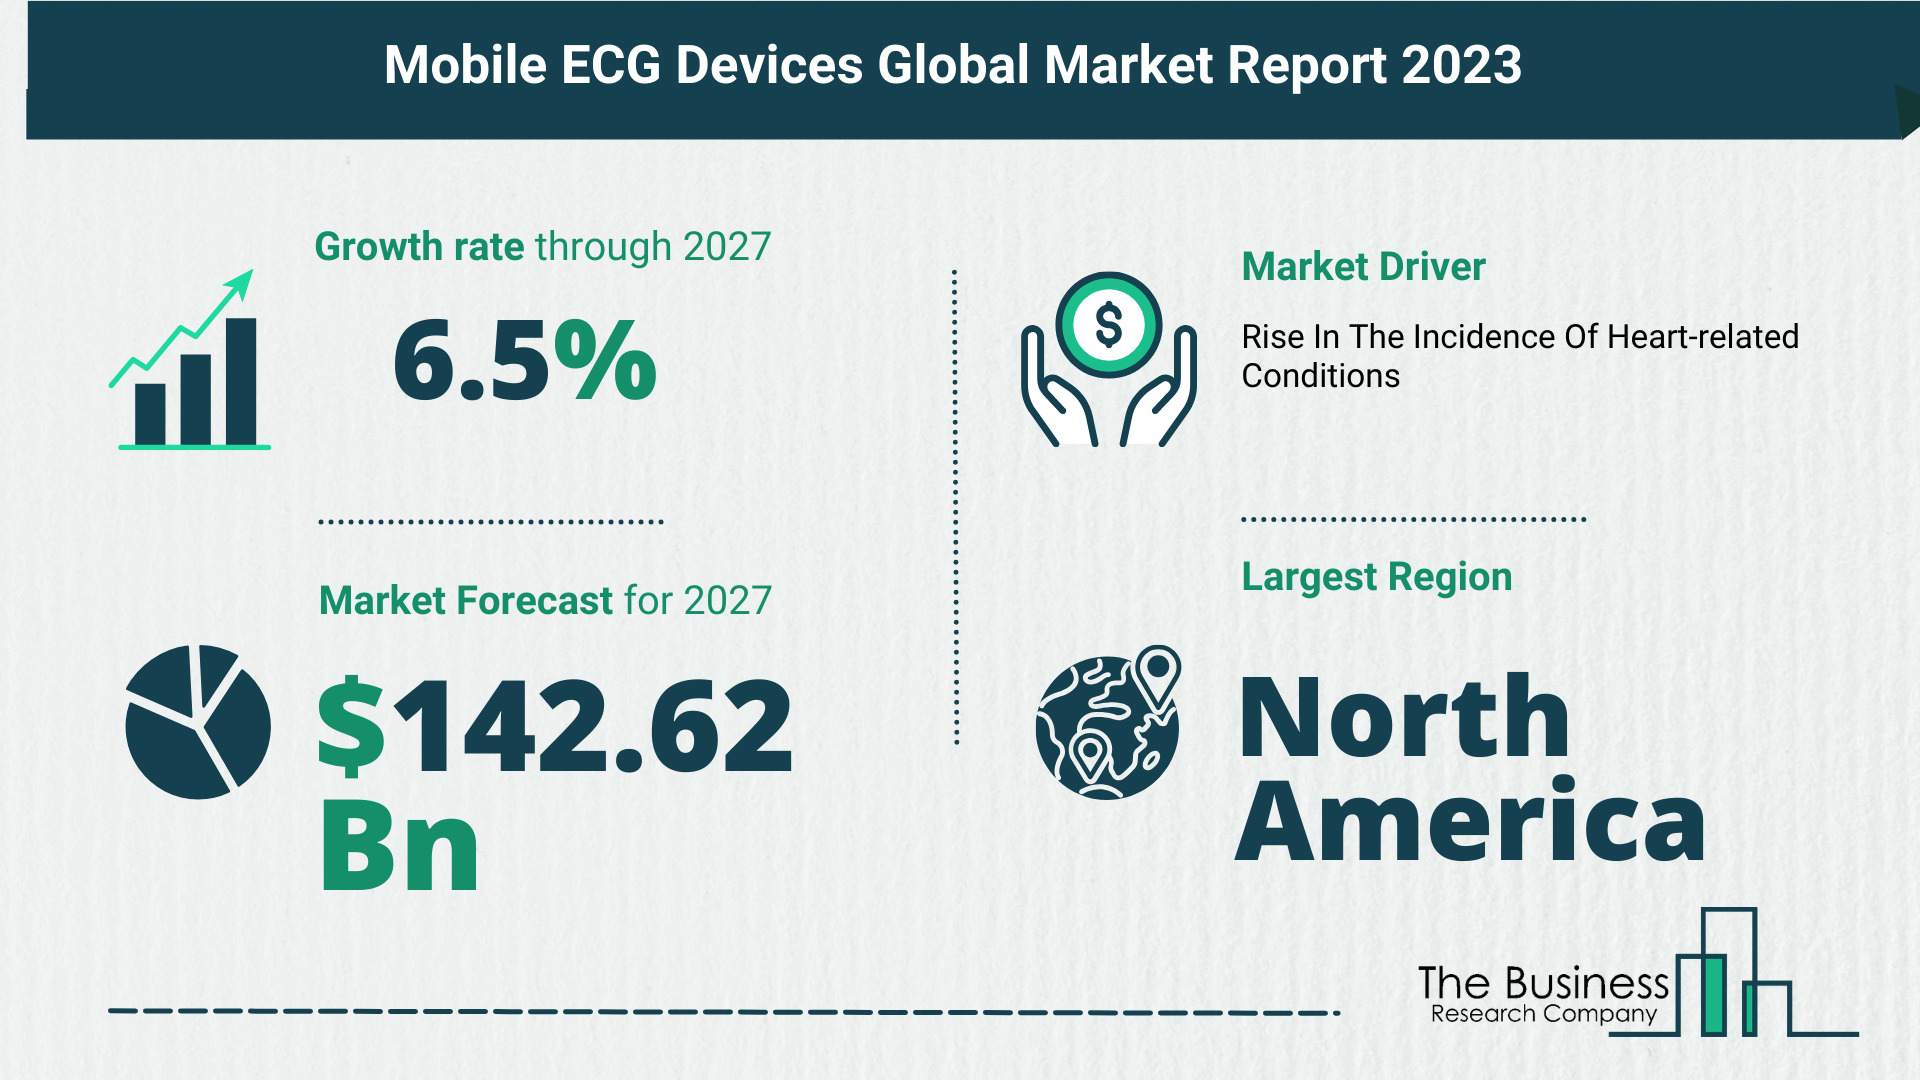 Key Takeaways From The Global Mobile ECG Devices Market Forecast 2023